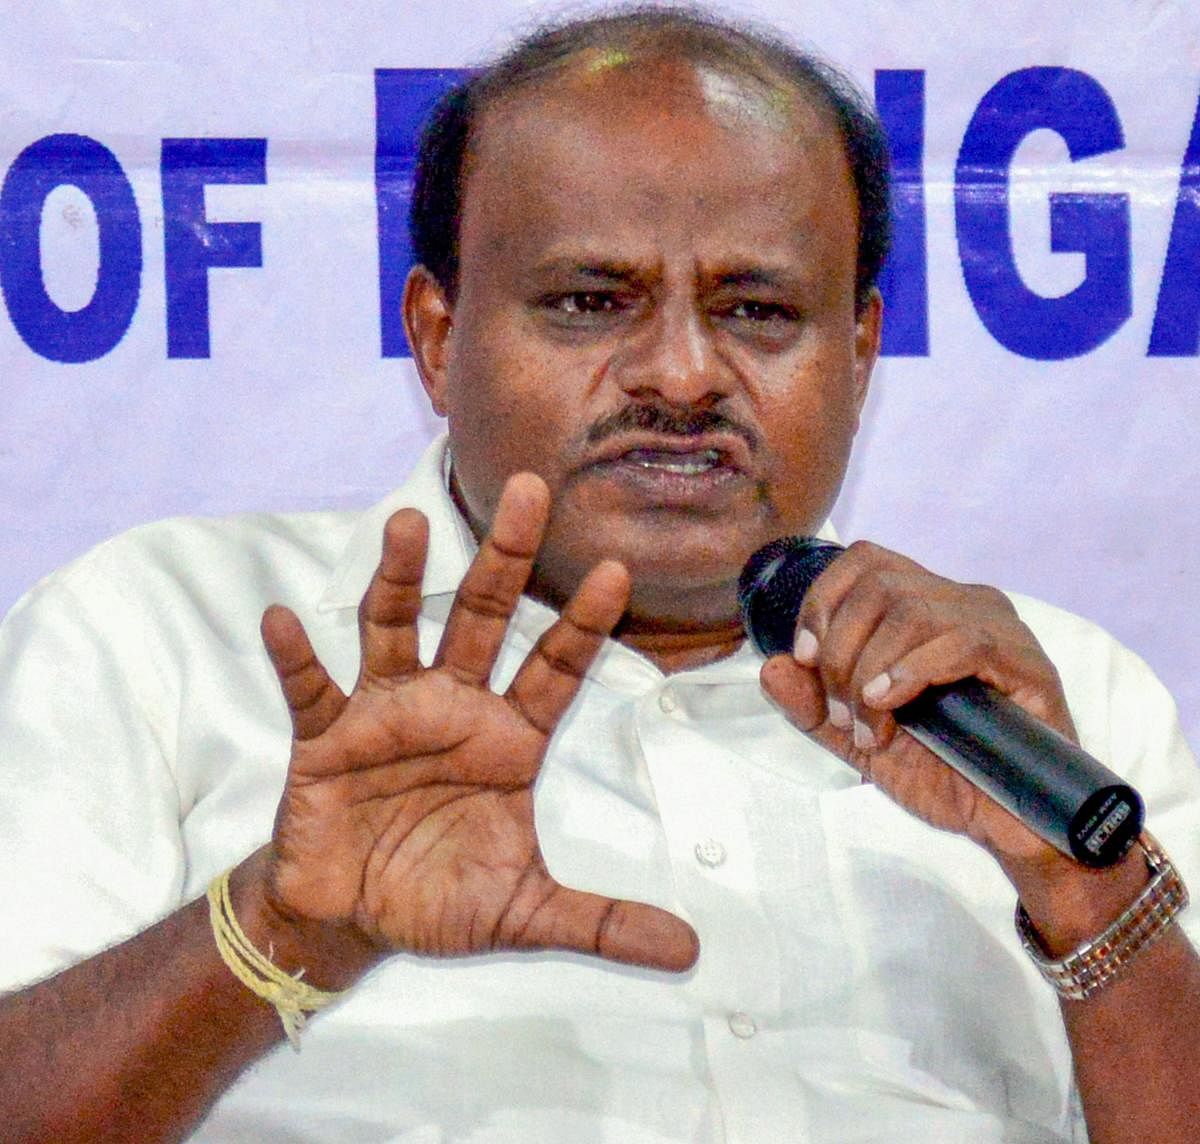 Kumaraswamy said there was a meeting in the mutt of Shivacharya Swamigalu that included some prominent seers, Chief Minister's son, which shows how "misuse" of power and cast politics was being played out, to exert pressure. PTI